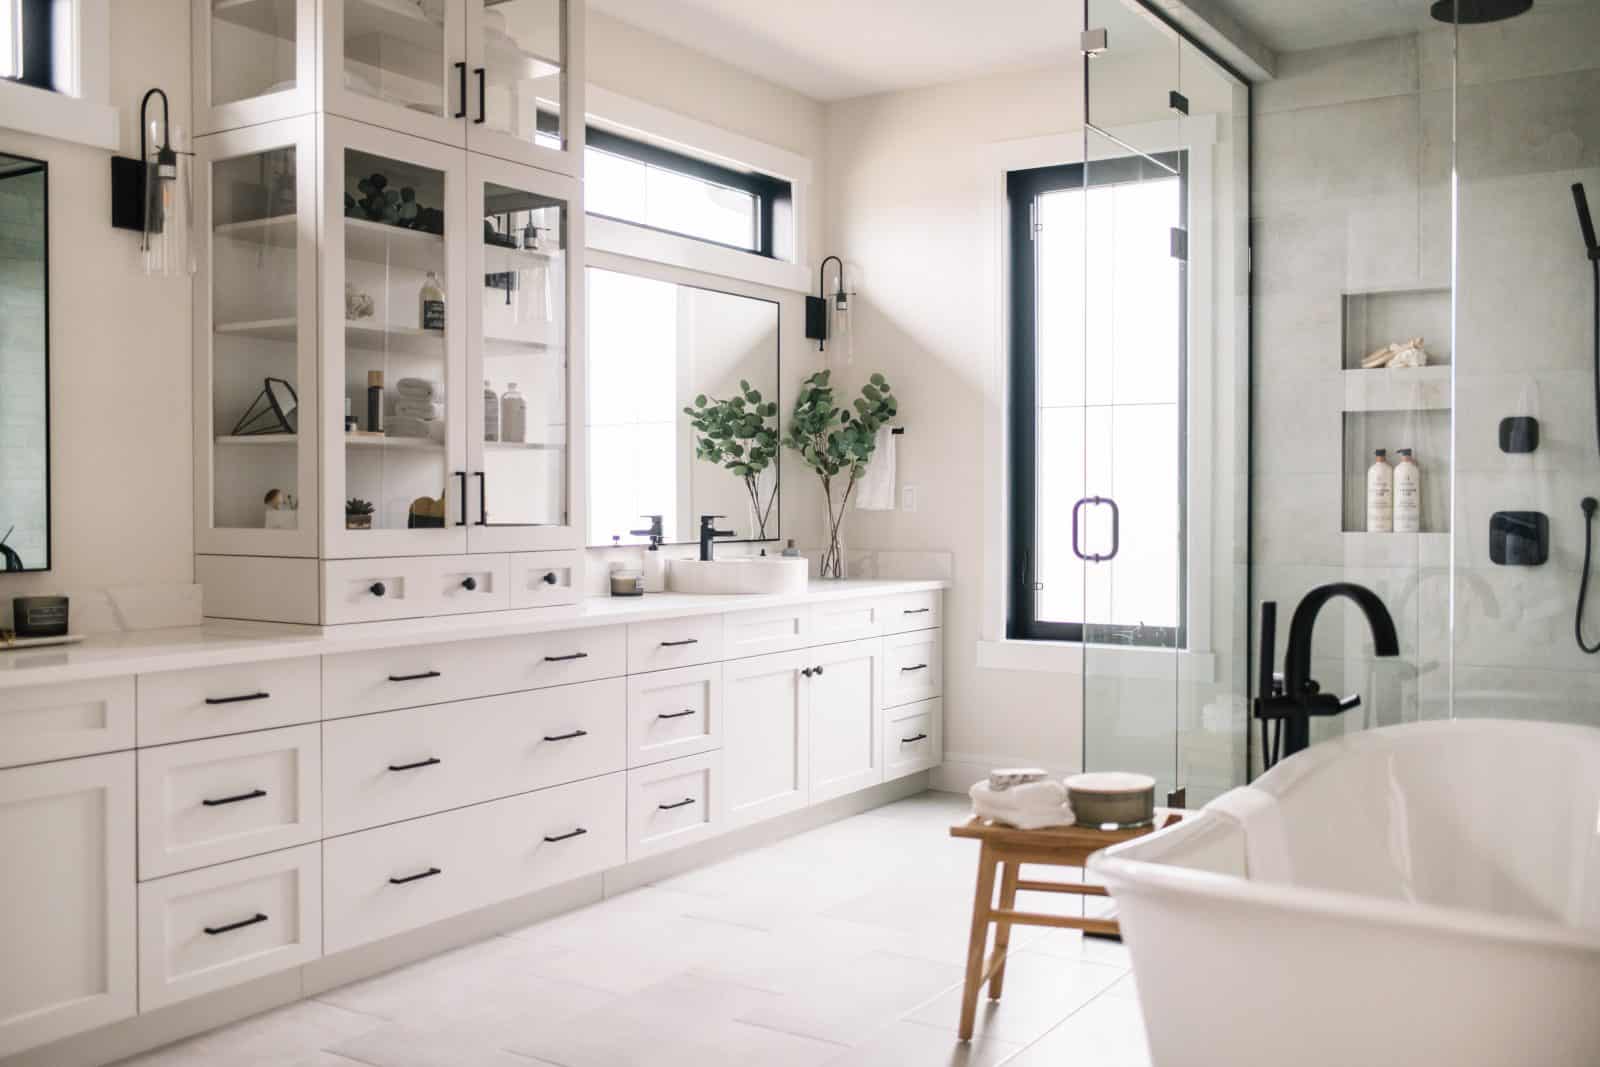 huge bathroom with white cabinets, counters, floor and large soaker tub